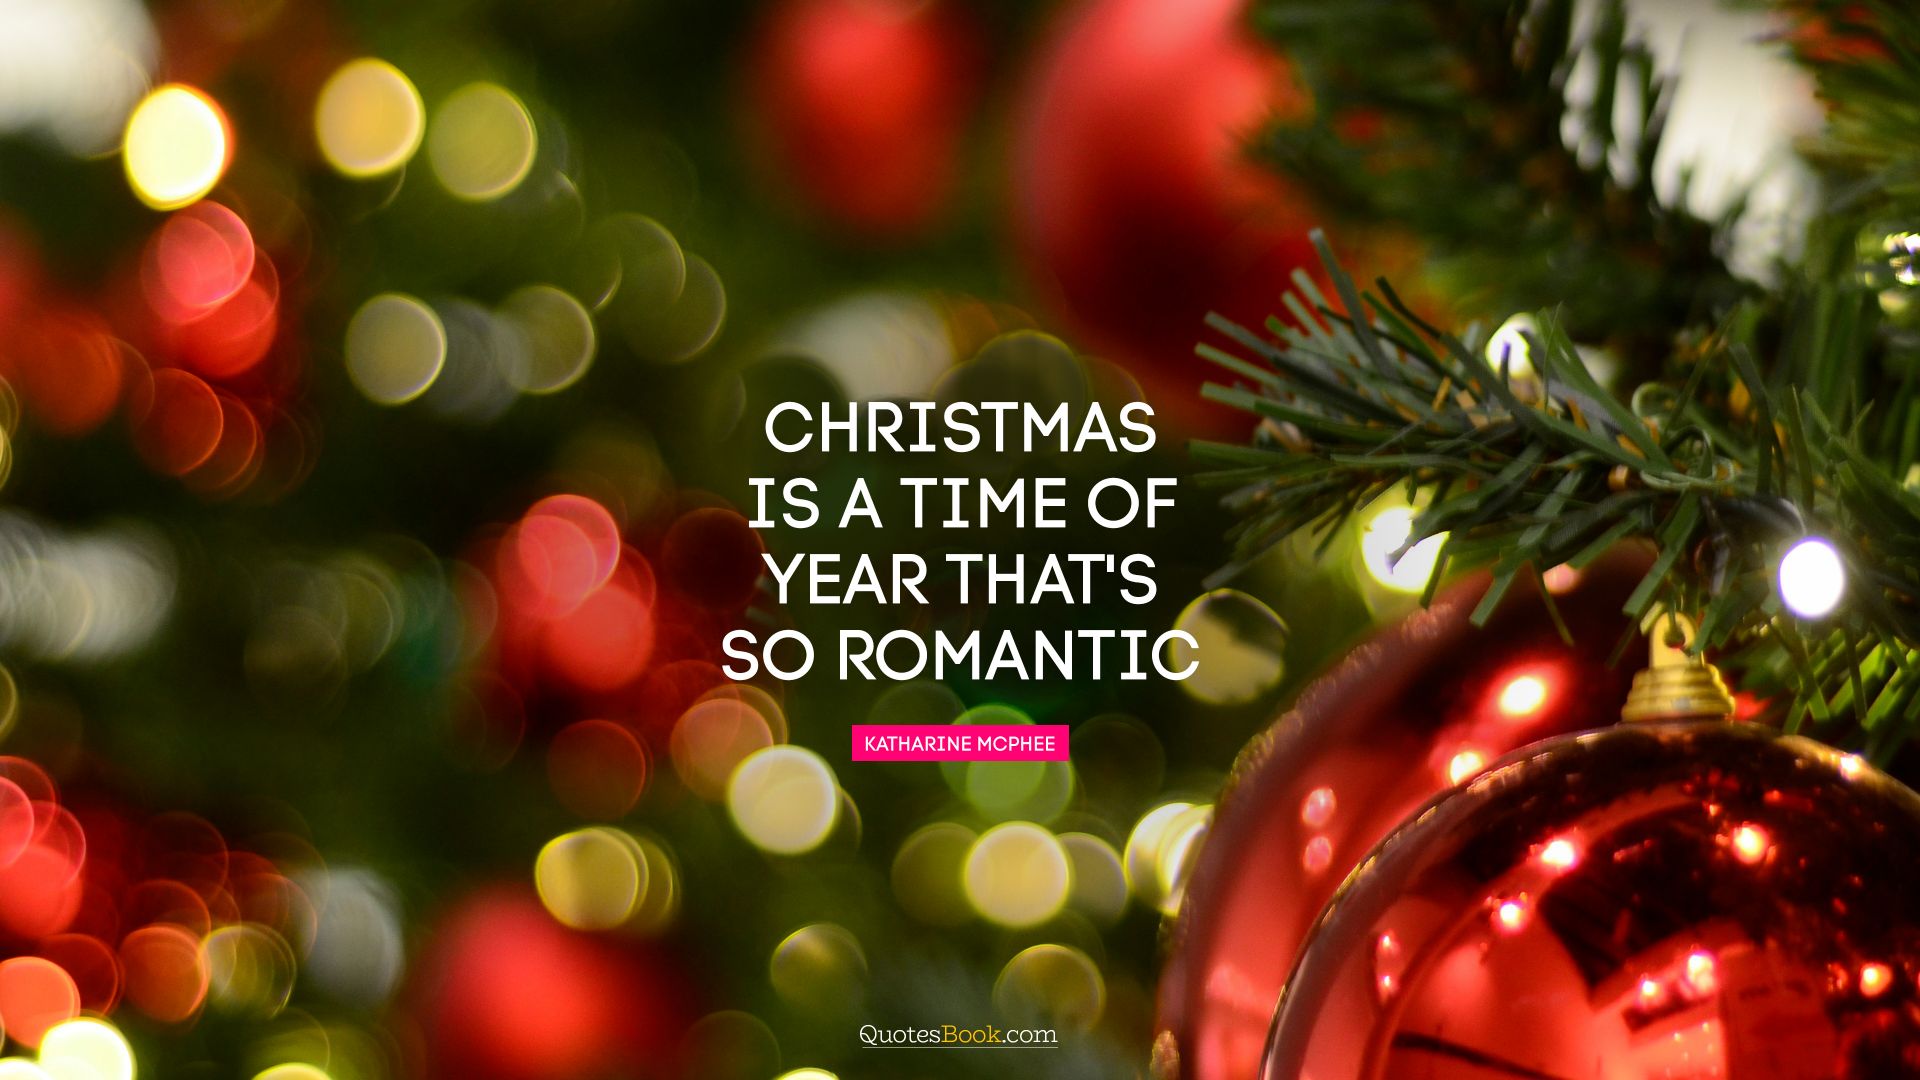 Christmas is a time of year that's so romantic. - Quote by Charles Lamb